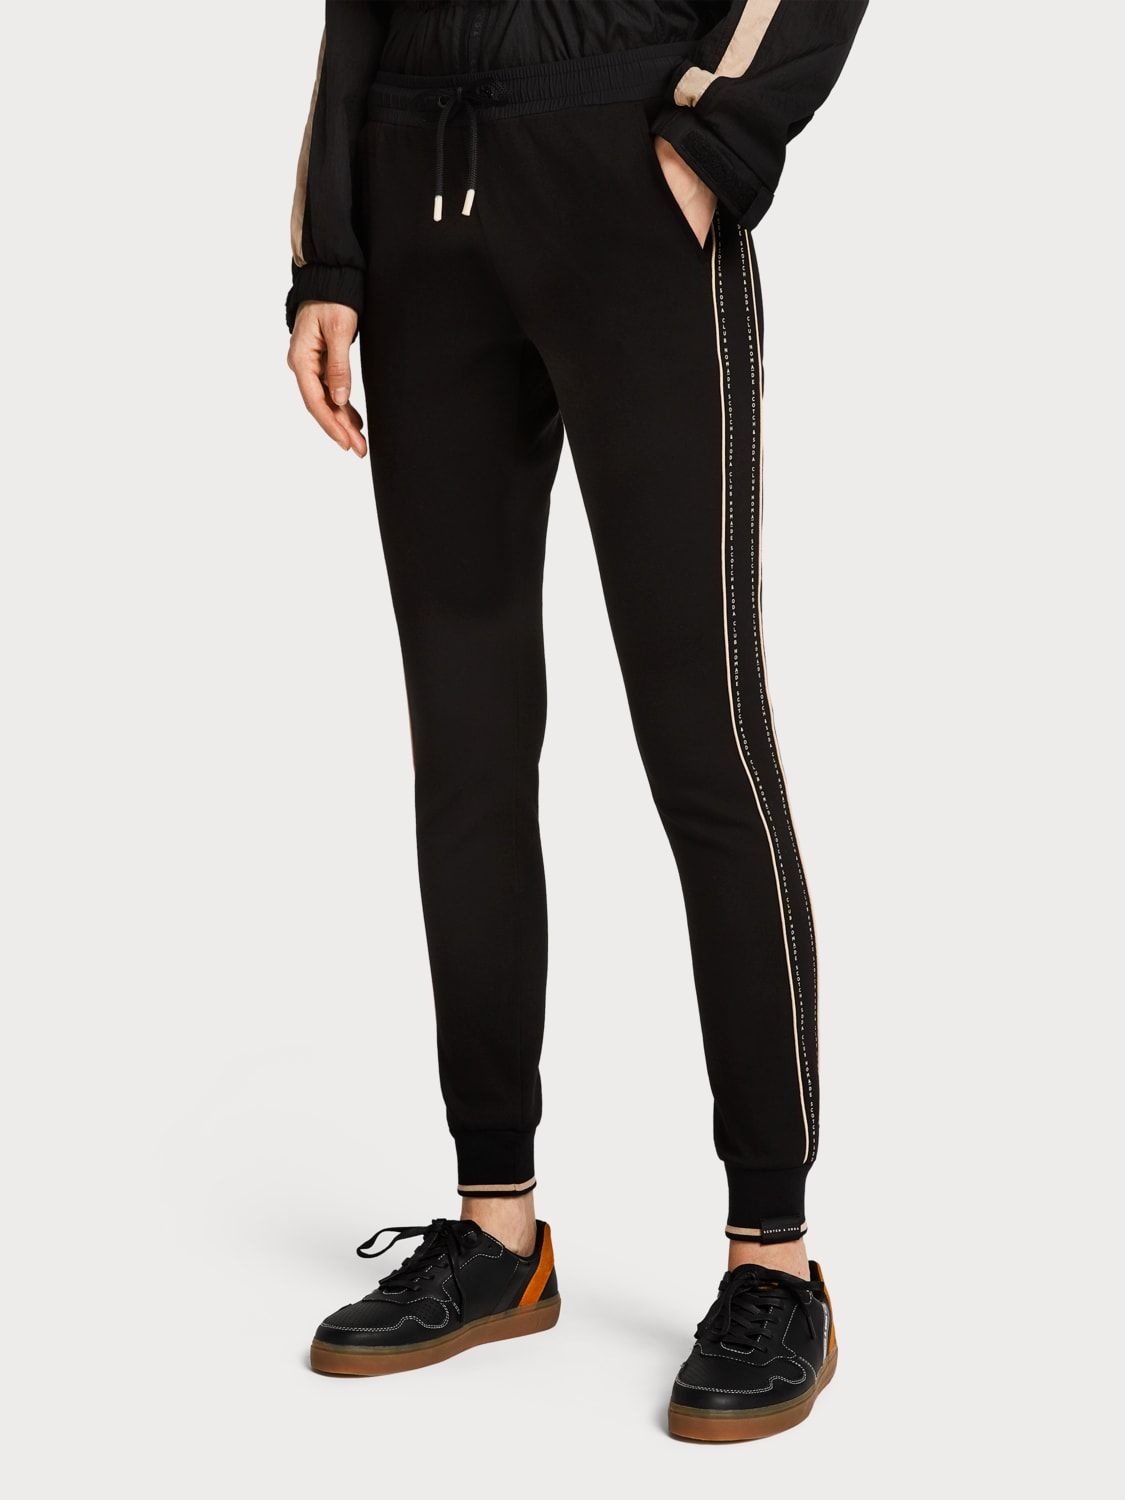 Slim Fit Sweatpants are Stylish and Great for Working Out – The Streets ...